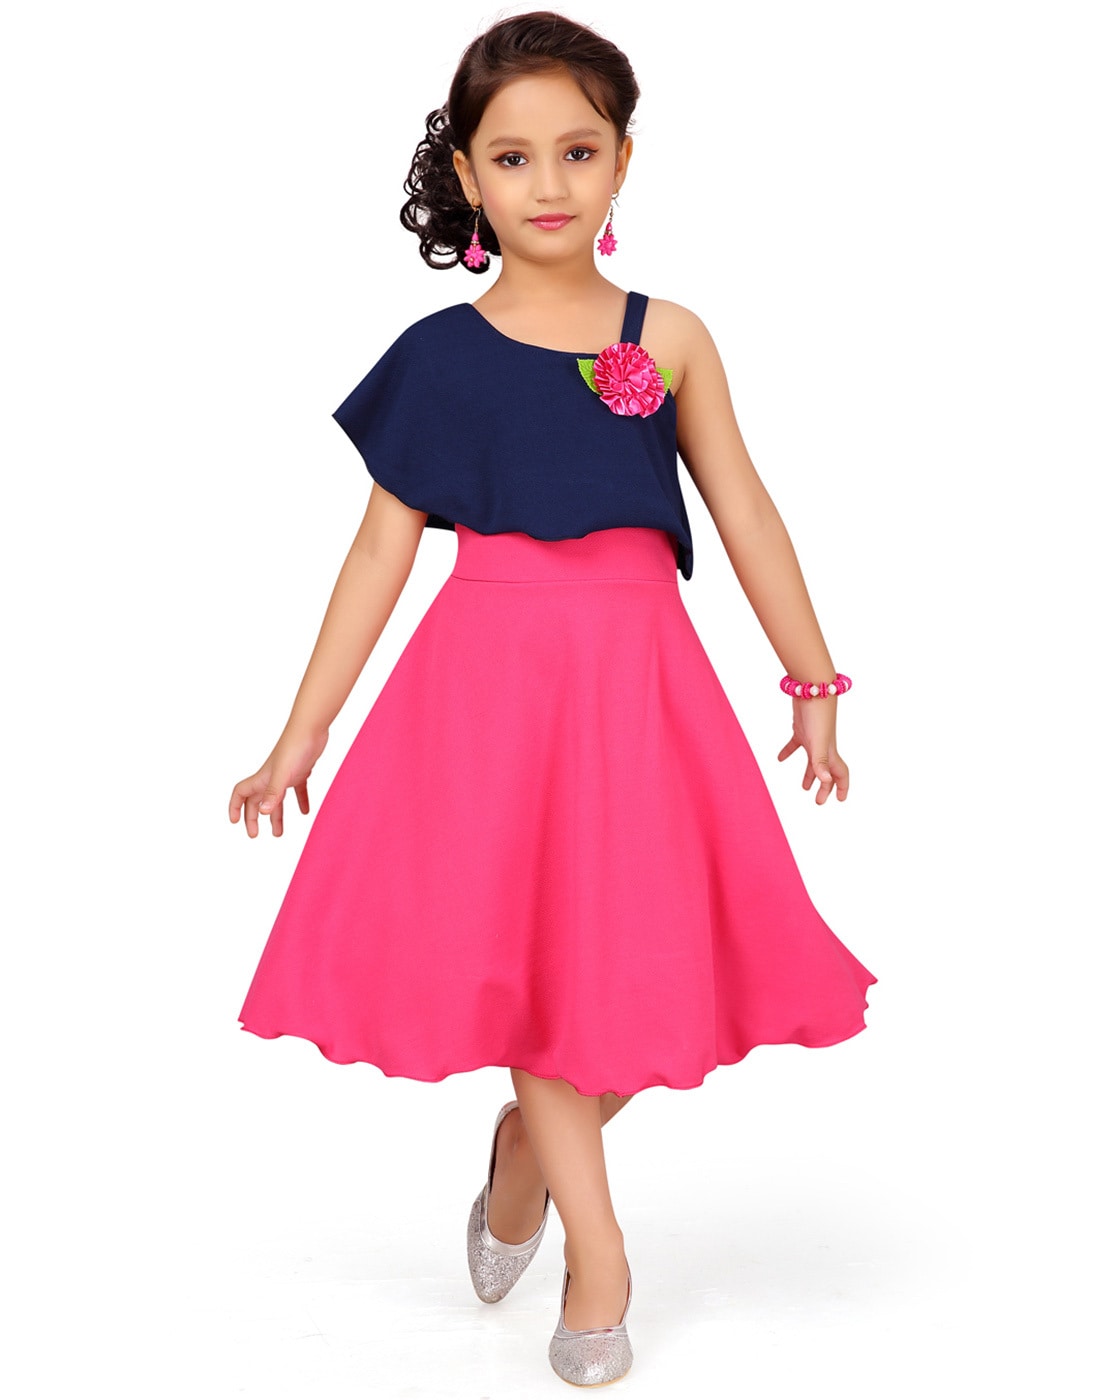 Kids girls wine color piano host singers performance trailing dresses model  show birthday party performance dresses